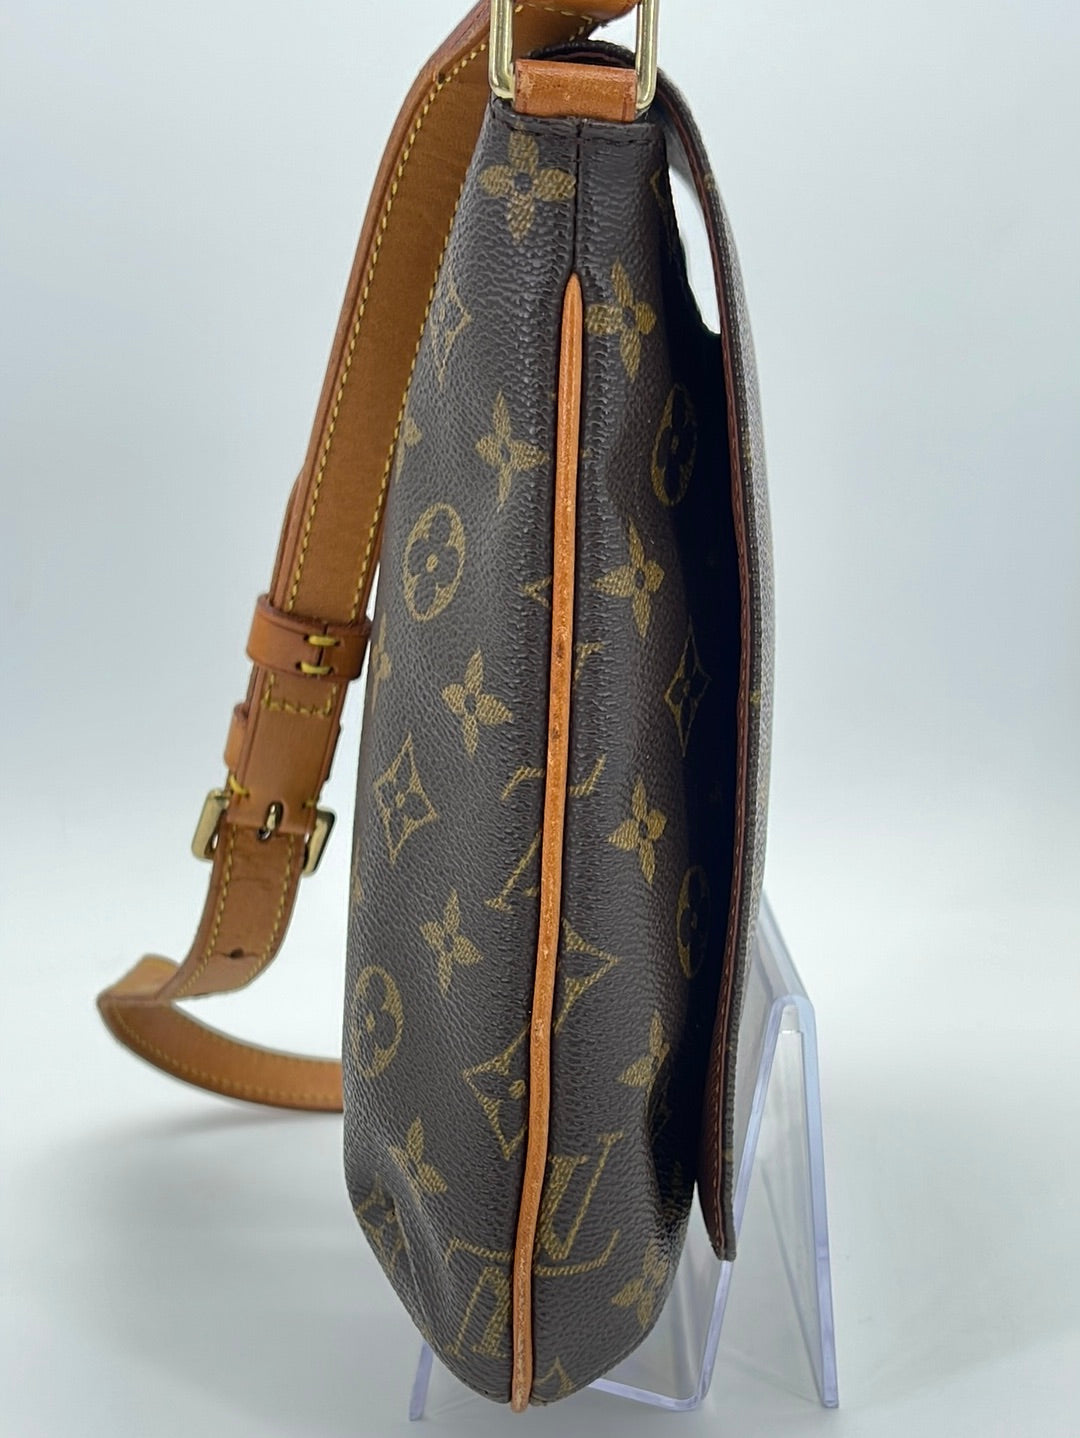 Louis Vuitton 2006 pre-owned Musette crossbody bag - ShopStyle